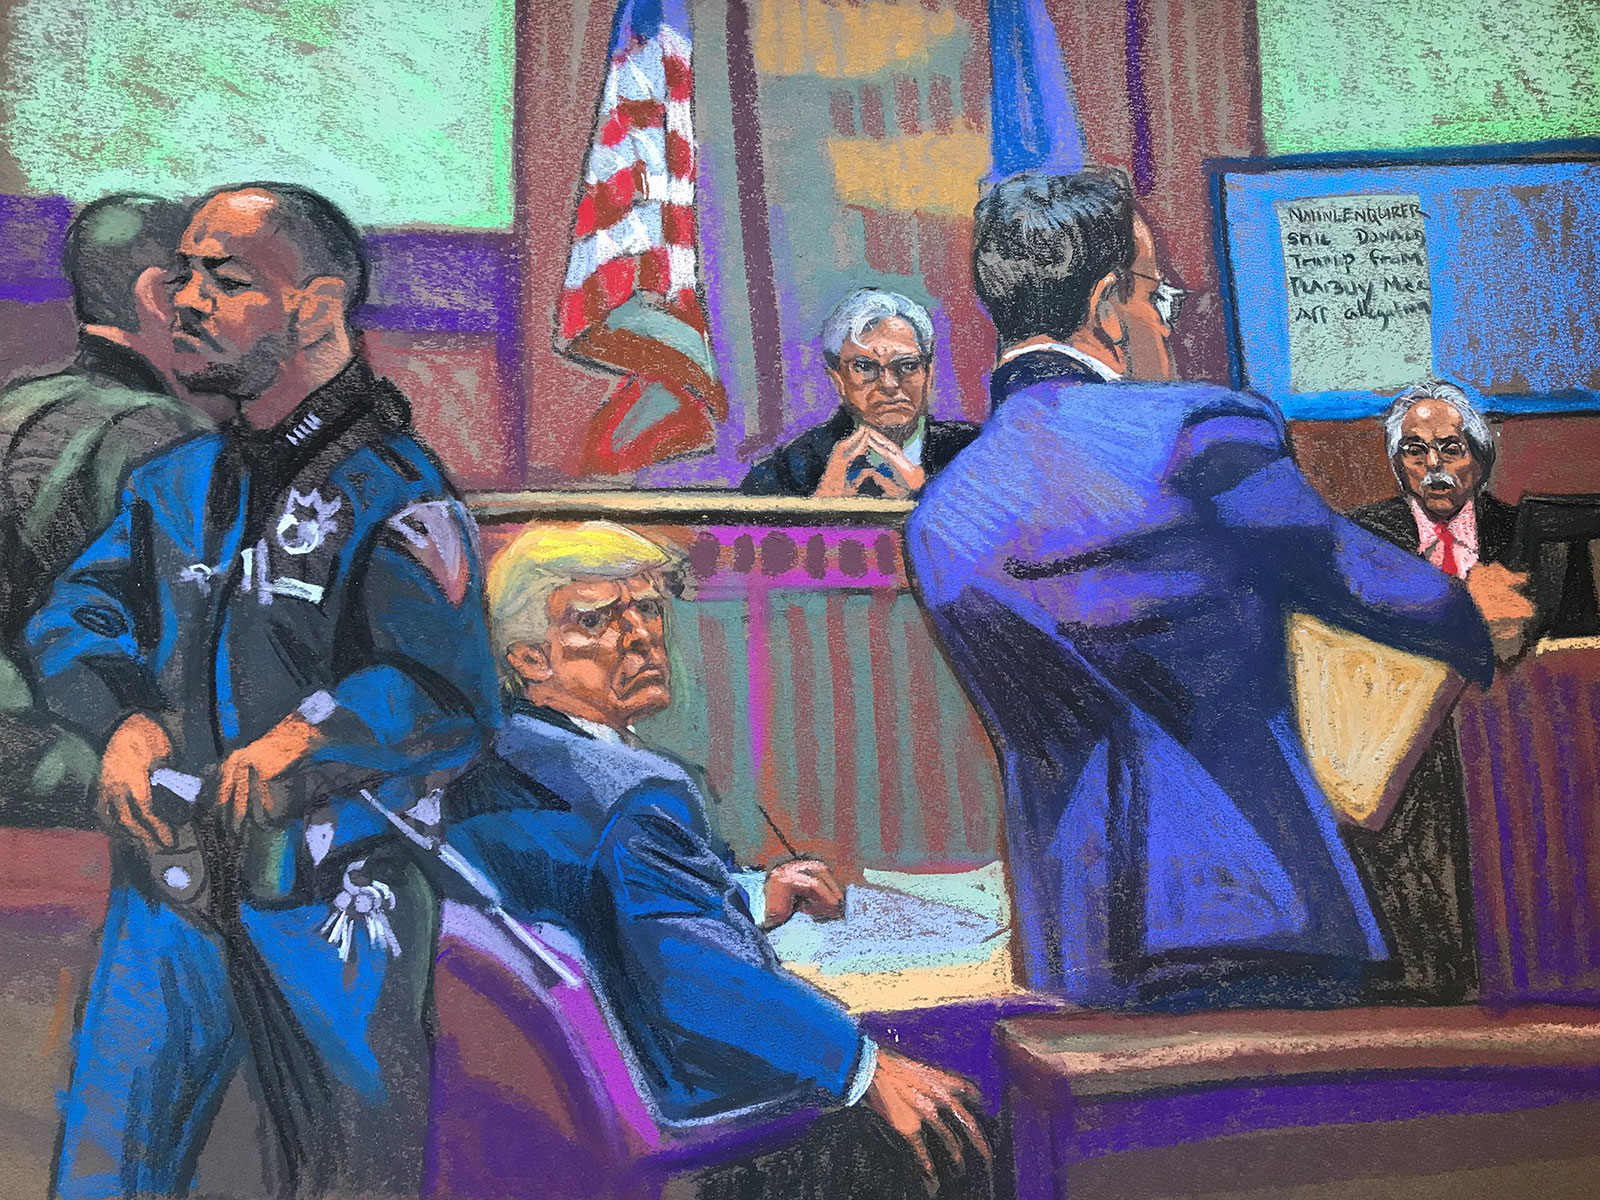 Trump sits in the courtroom.